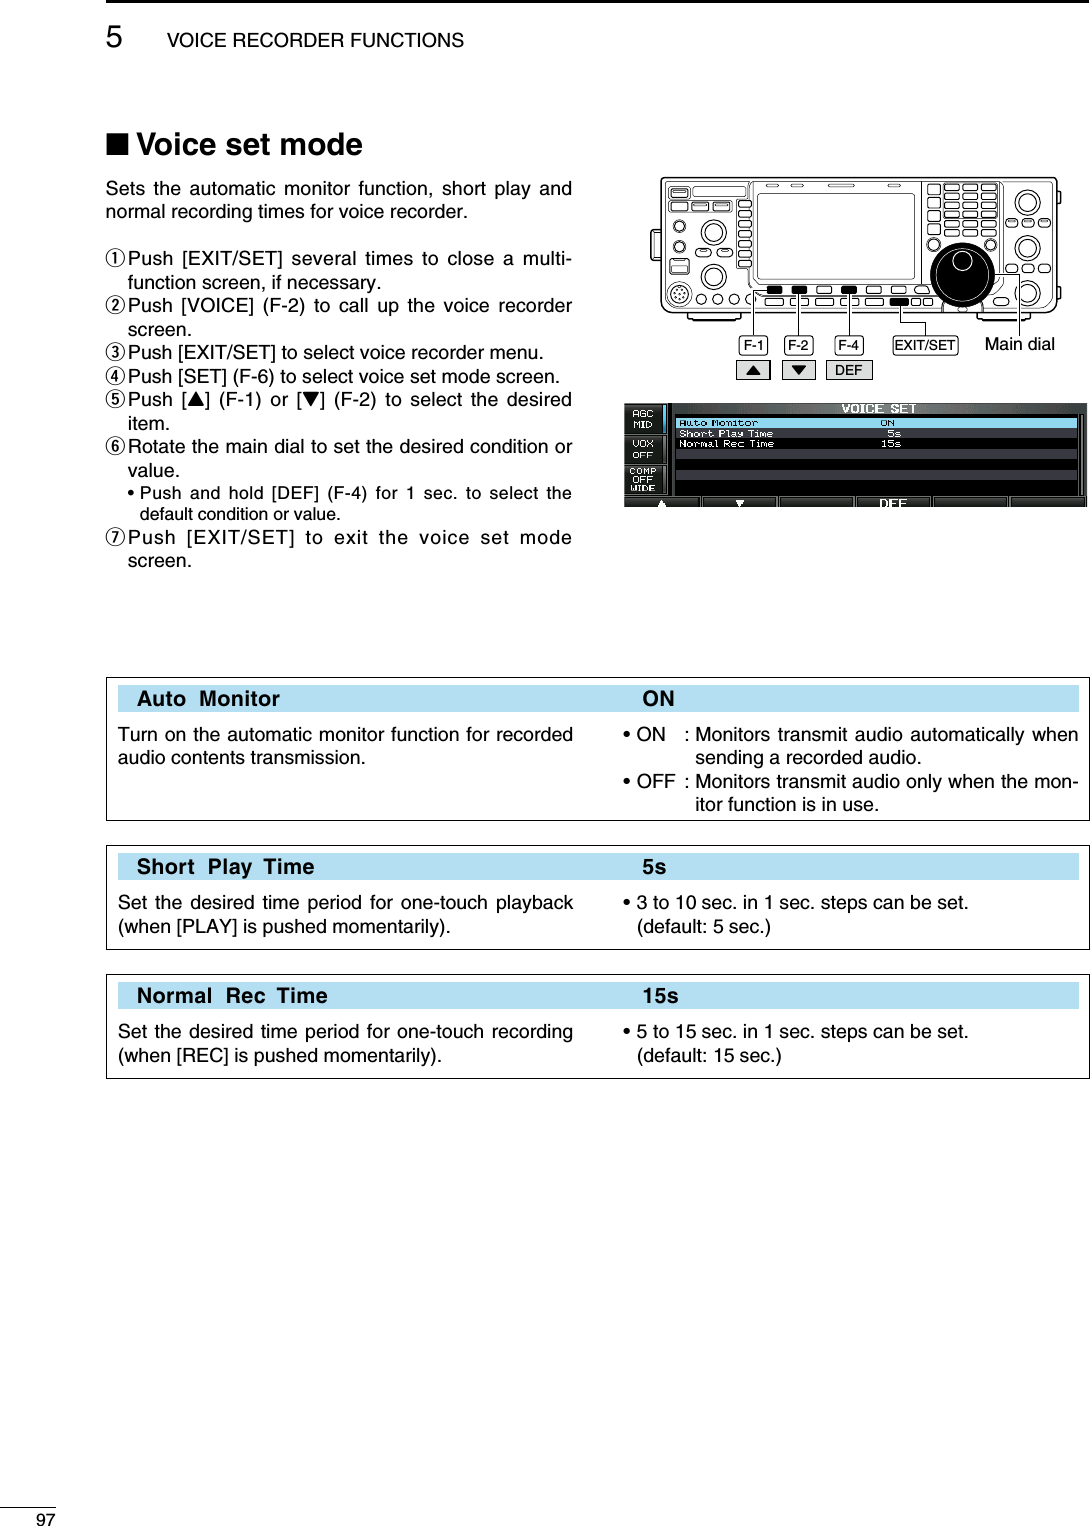 N Voice set modeSets the automatic monitor function, short play and normal recording times for voice recorder.q  Push [EXIT/SET] several times to close a multi-function screen, if necessary.w  Push [VOICE] (F-2) to call up the voice recorder screen.e Push [EXIT/SET] to select voice recorder menu.r Push [SET] (F-6) to select voice set mode screen.t  Push [Y] (F-1) or [Z] (F-2) to select the desired item.y  Rotate the main dial to set the desired condition or value. •  Push and hold [DEF] (F-4) for 1 sec. to select the default condition or value.u  Push [EXIT/SET] to exit the voice set mode screen.F-1 F-2 F-4 EXIT/SET Main dialDEF   Auto  Monitor    ONTurn on the automatic monitor function for recorded audio contents transmission.• ON  :  Monitors transmit audio automatically when sending a recorded audio.• OFF :  Monitors transmit audio only when the mon-itor function is in use.   Short  Play  Time    5sSet the desired time period for one-touch playback (when [PLAY] is pushed momentarily).•  3 to 10 sec. in 1 sec. steps can be set.  (default: 5 sec.)   Normal  Rec  Time    15sSet the desired time period for one-touch recording (when [REC] is pushed momentarily).•  5 to 15 sec. in 1 sec. steps can be set.  (default: 15 sec.)975VOICE RECORDER FUNCTIONS